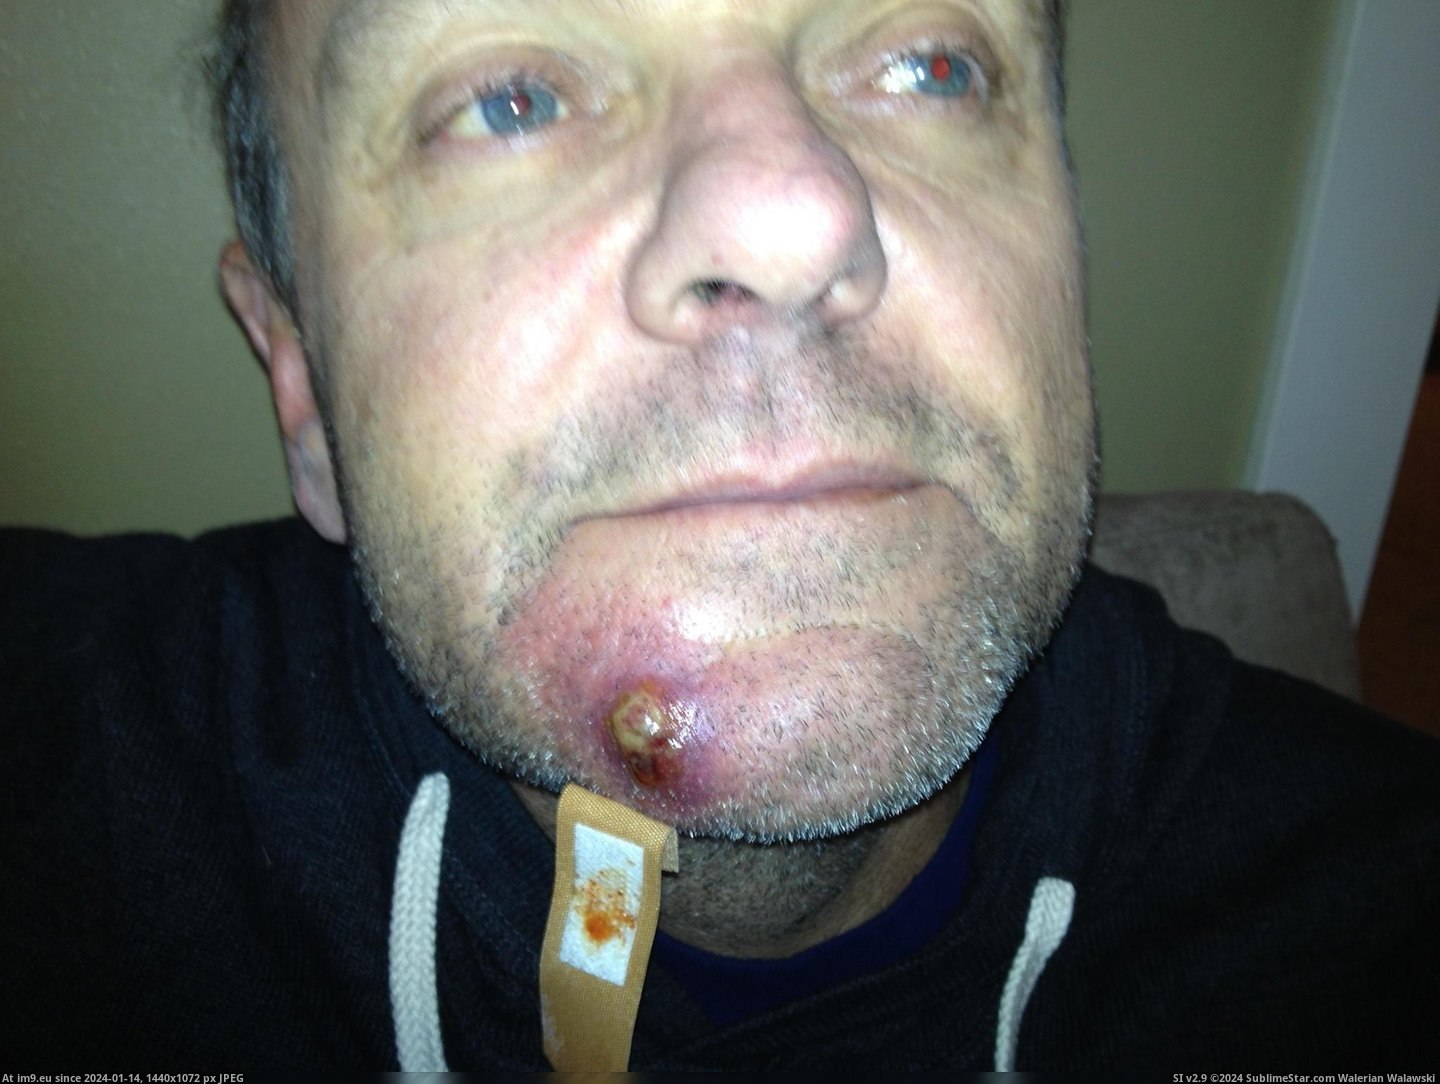 #Wtf #Dad #Ingrown #Whisker #Infection #Staff [Wtf] My dad's ingrown whisker + staff infection Pic. (Bild von album My r/WTF favs))